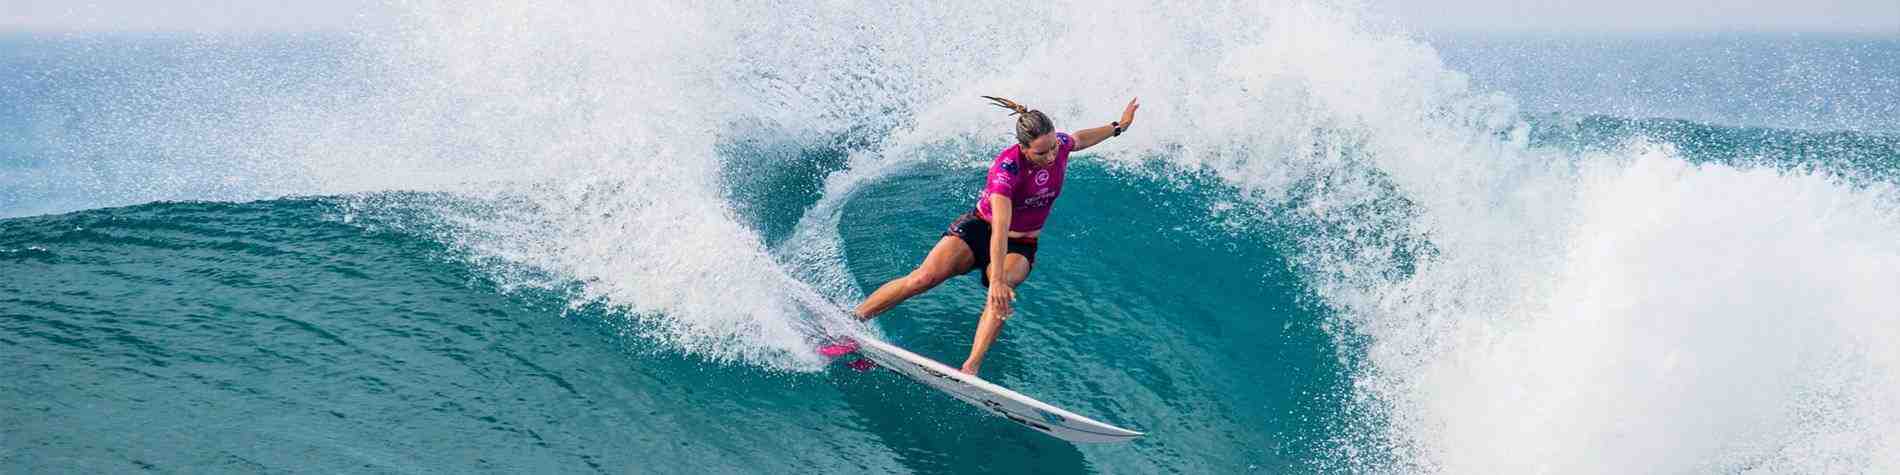 What surfboard does Sally Fitzgibbons?